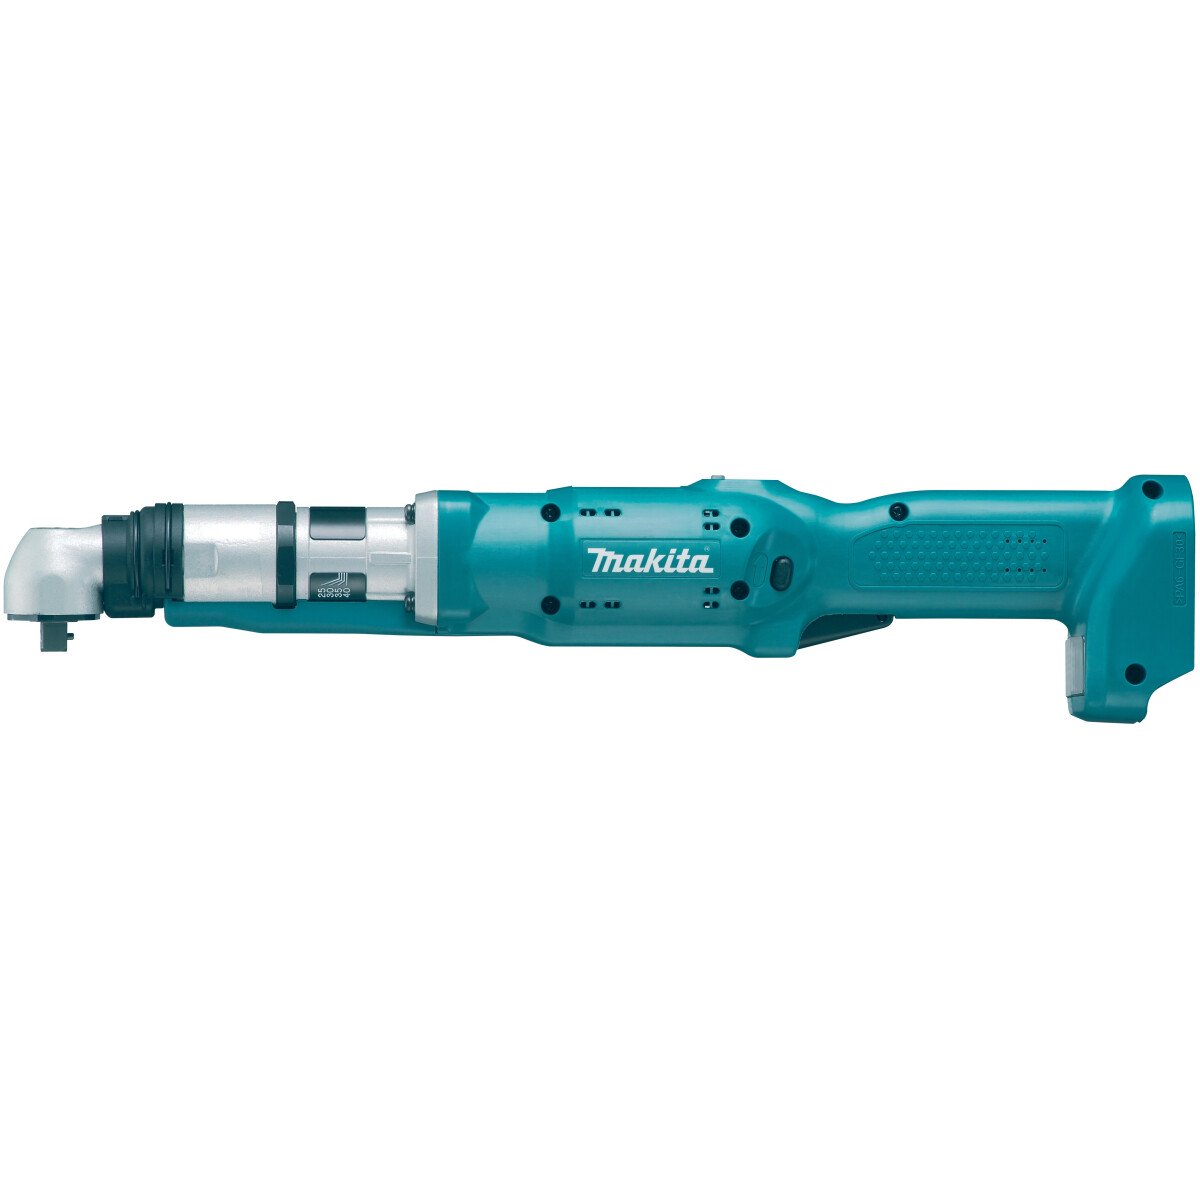 Makita DFL402RZ Body Only 14.4v Angle Screwdriver with Wireless Fastening Data Capture System